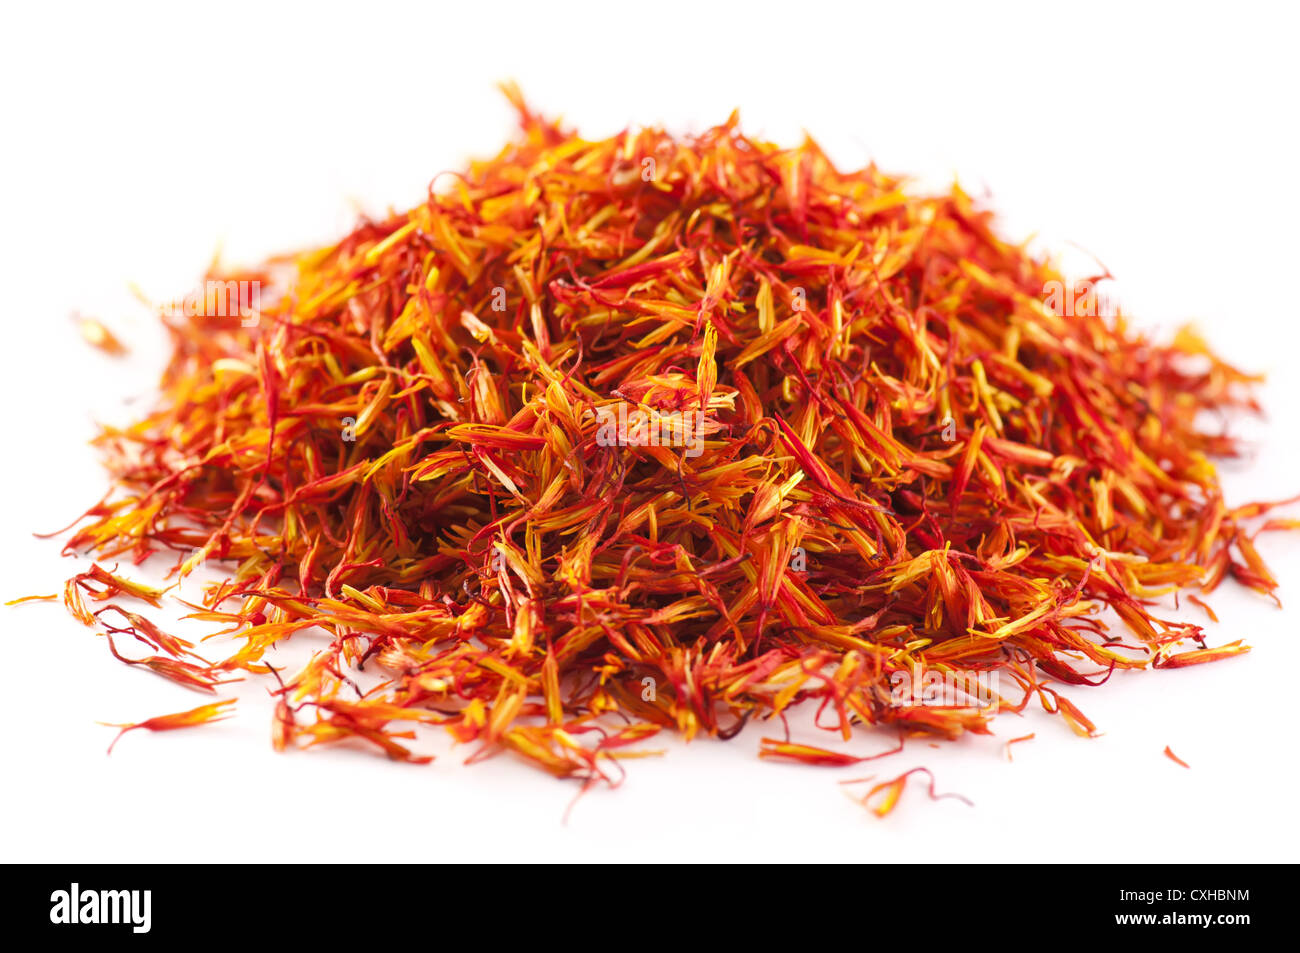 Safflower on the white background isolated Stock Photo